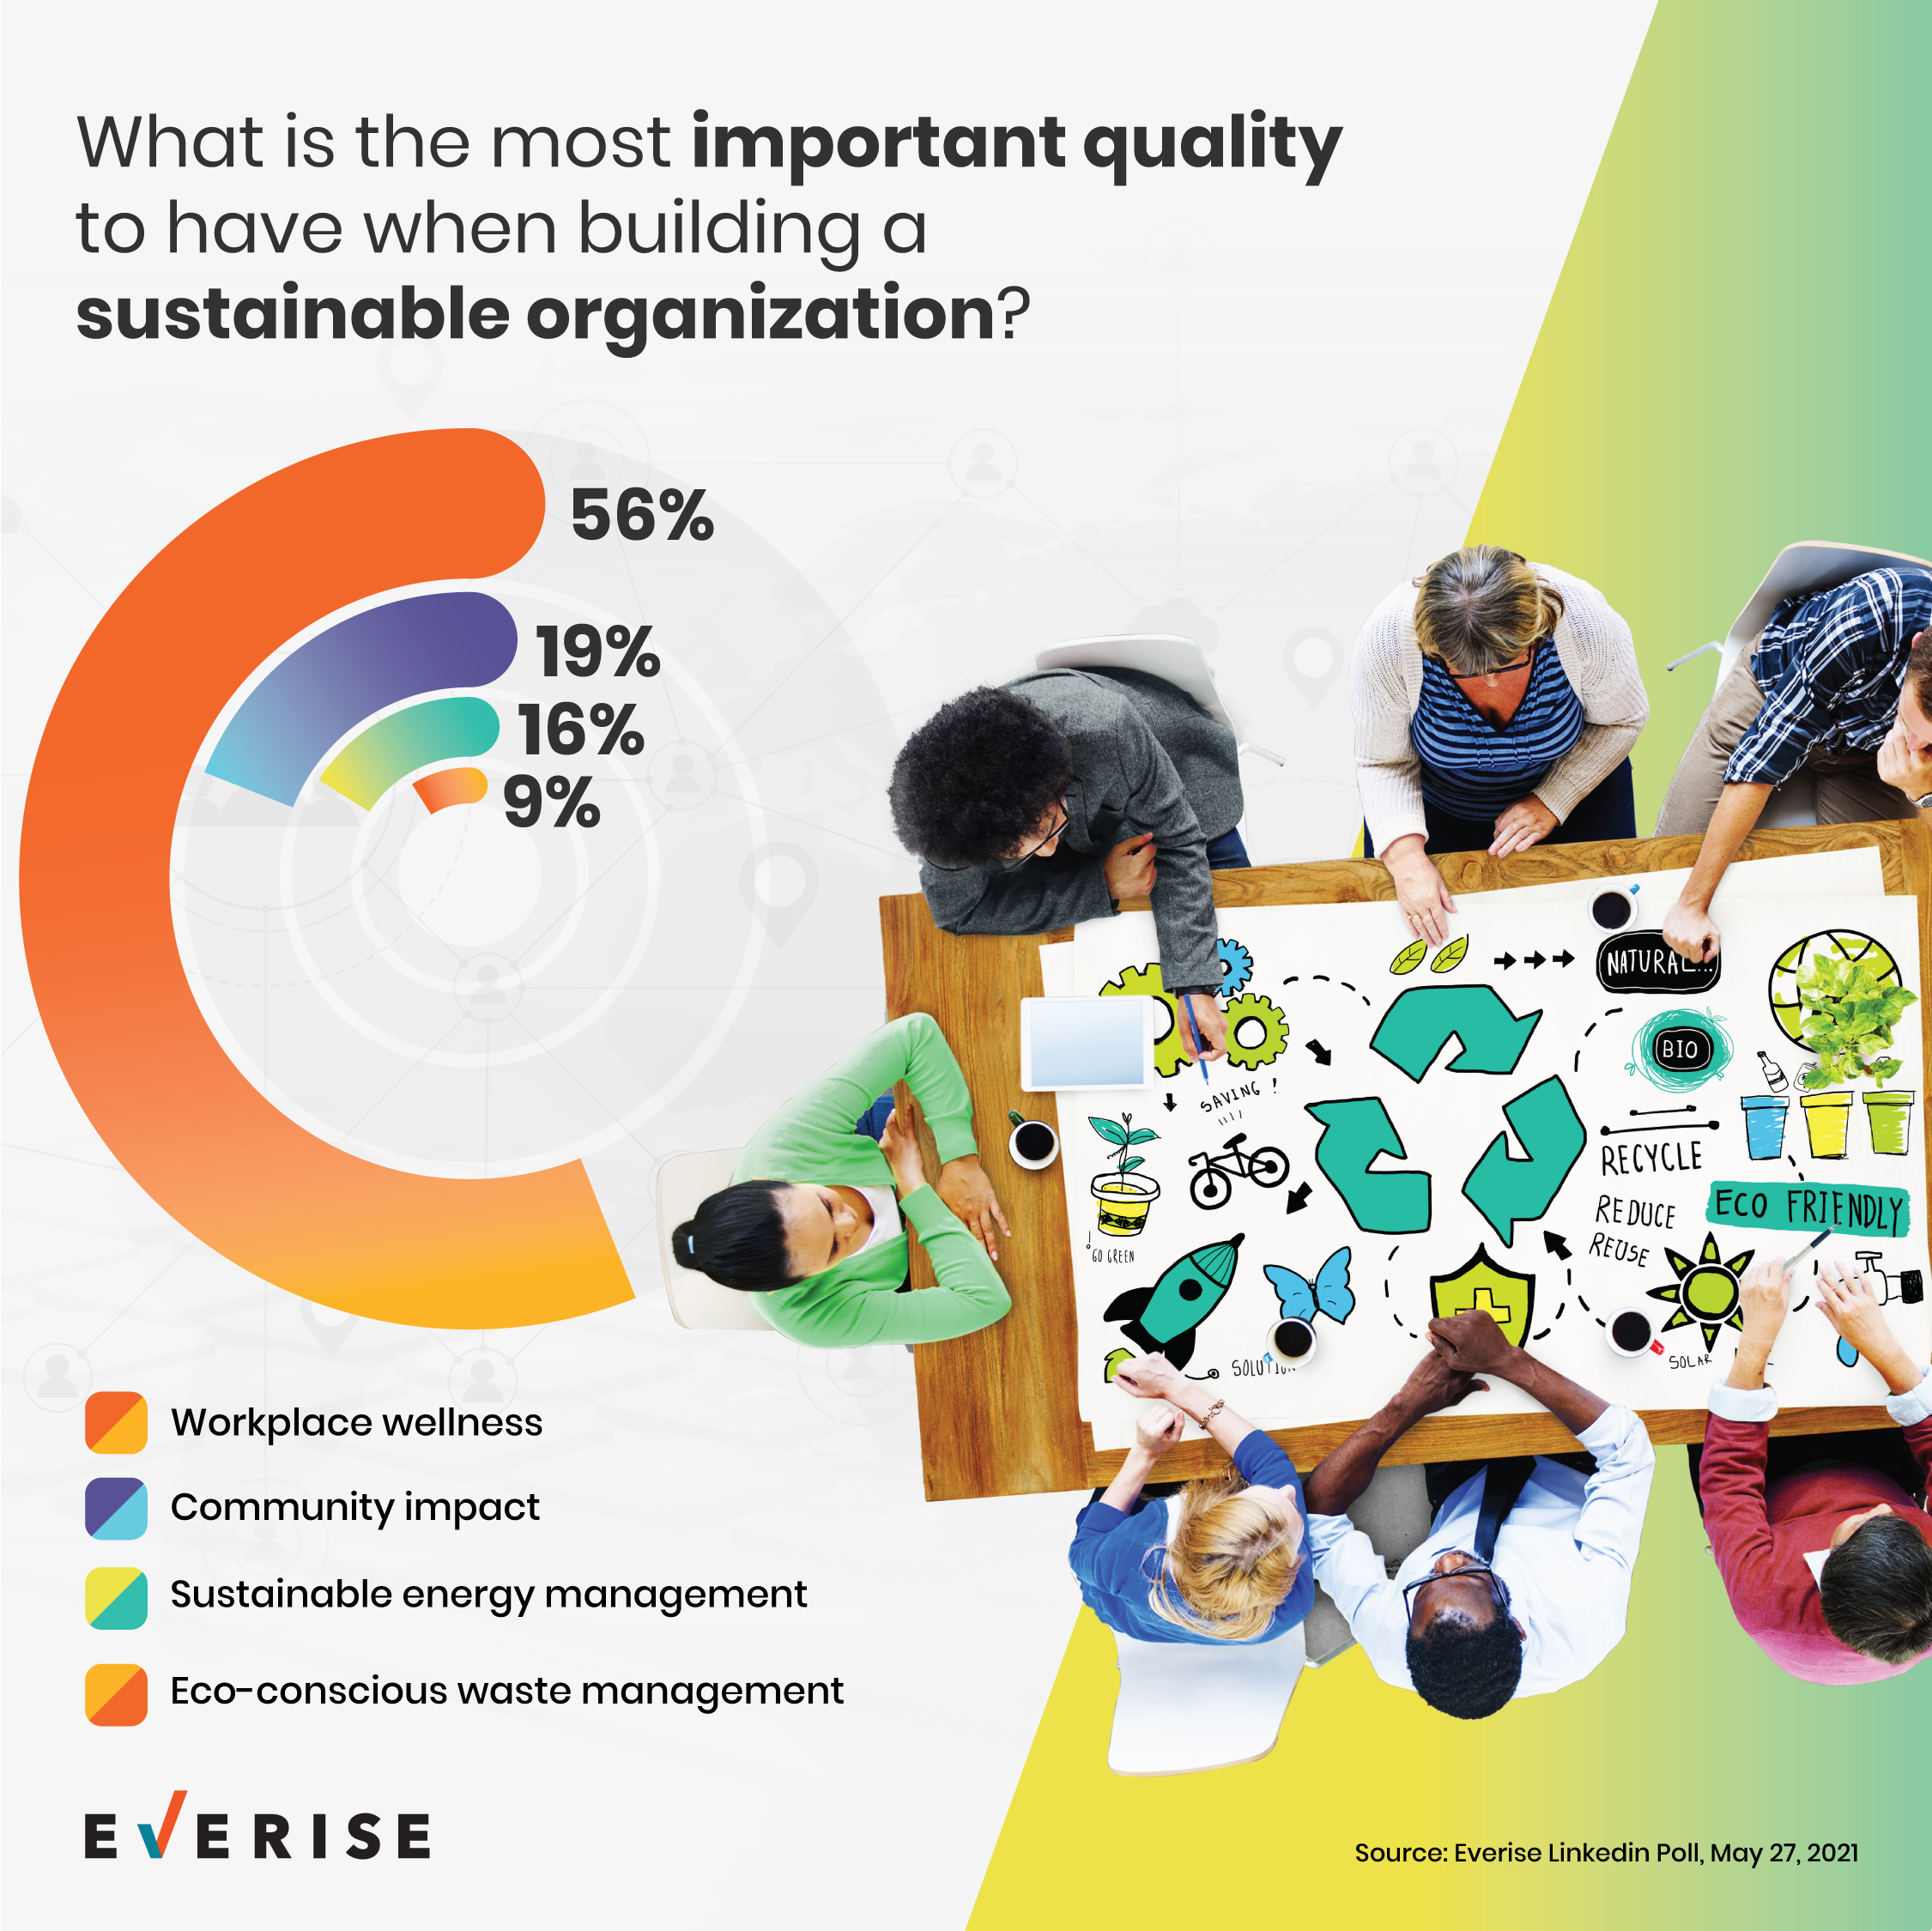 Most Important Quality for Building a Sustainable Organization